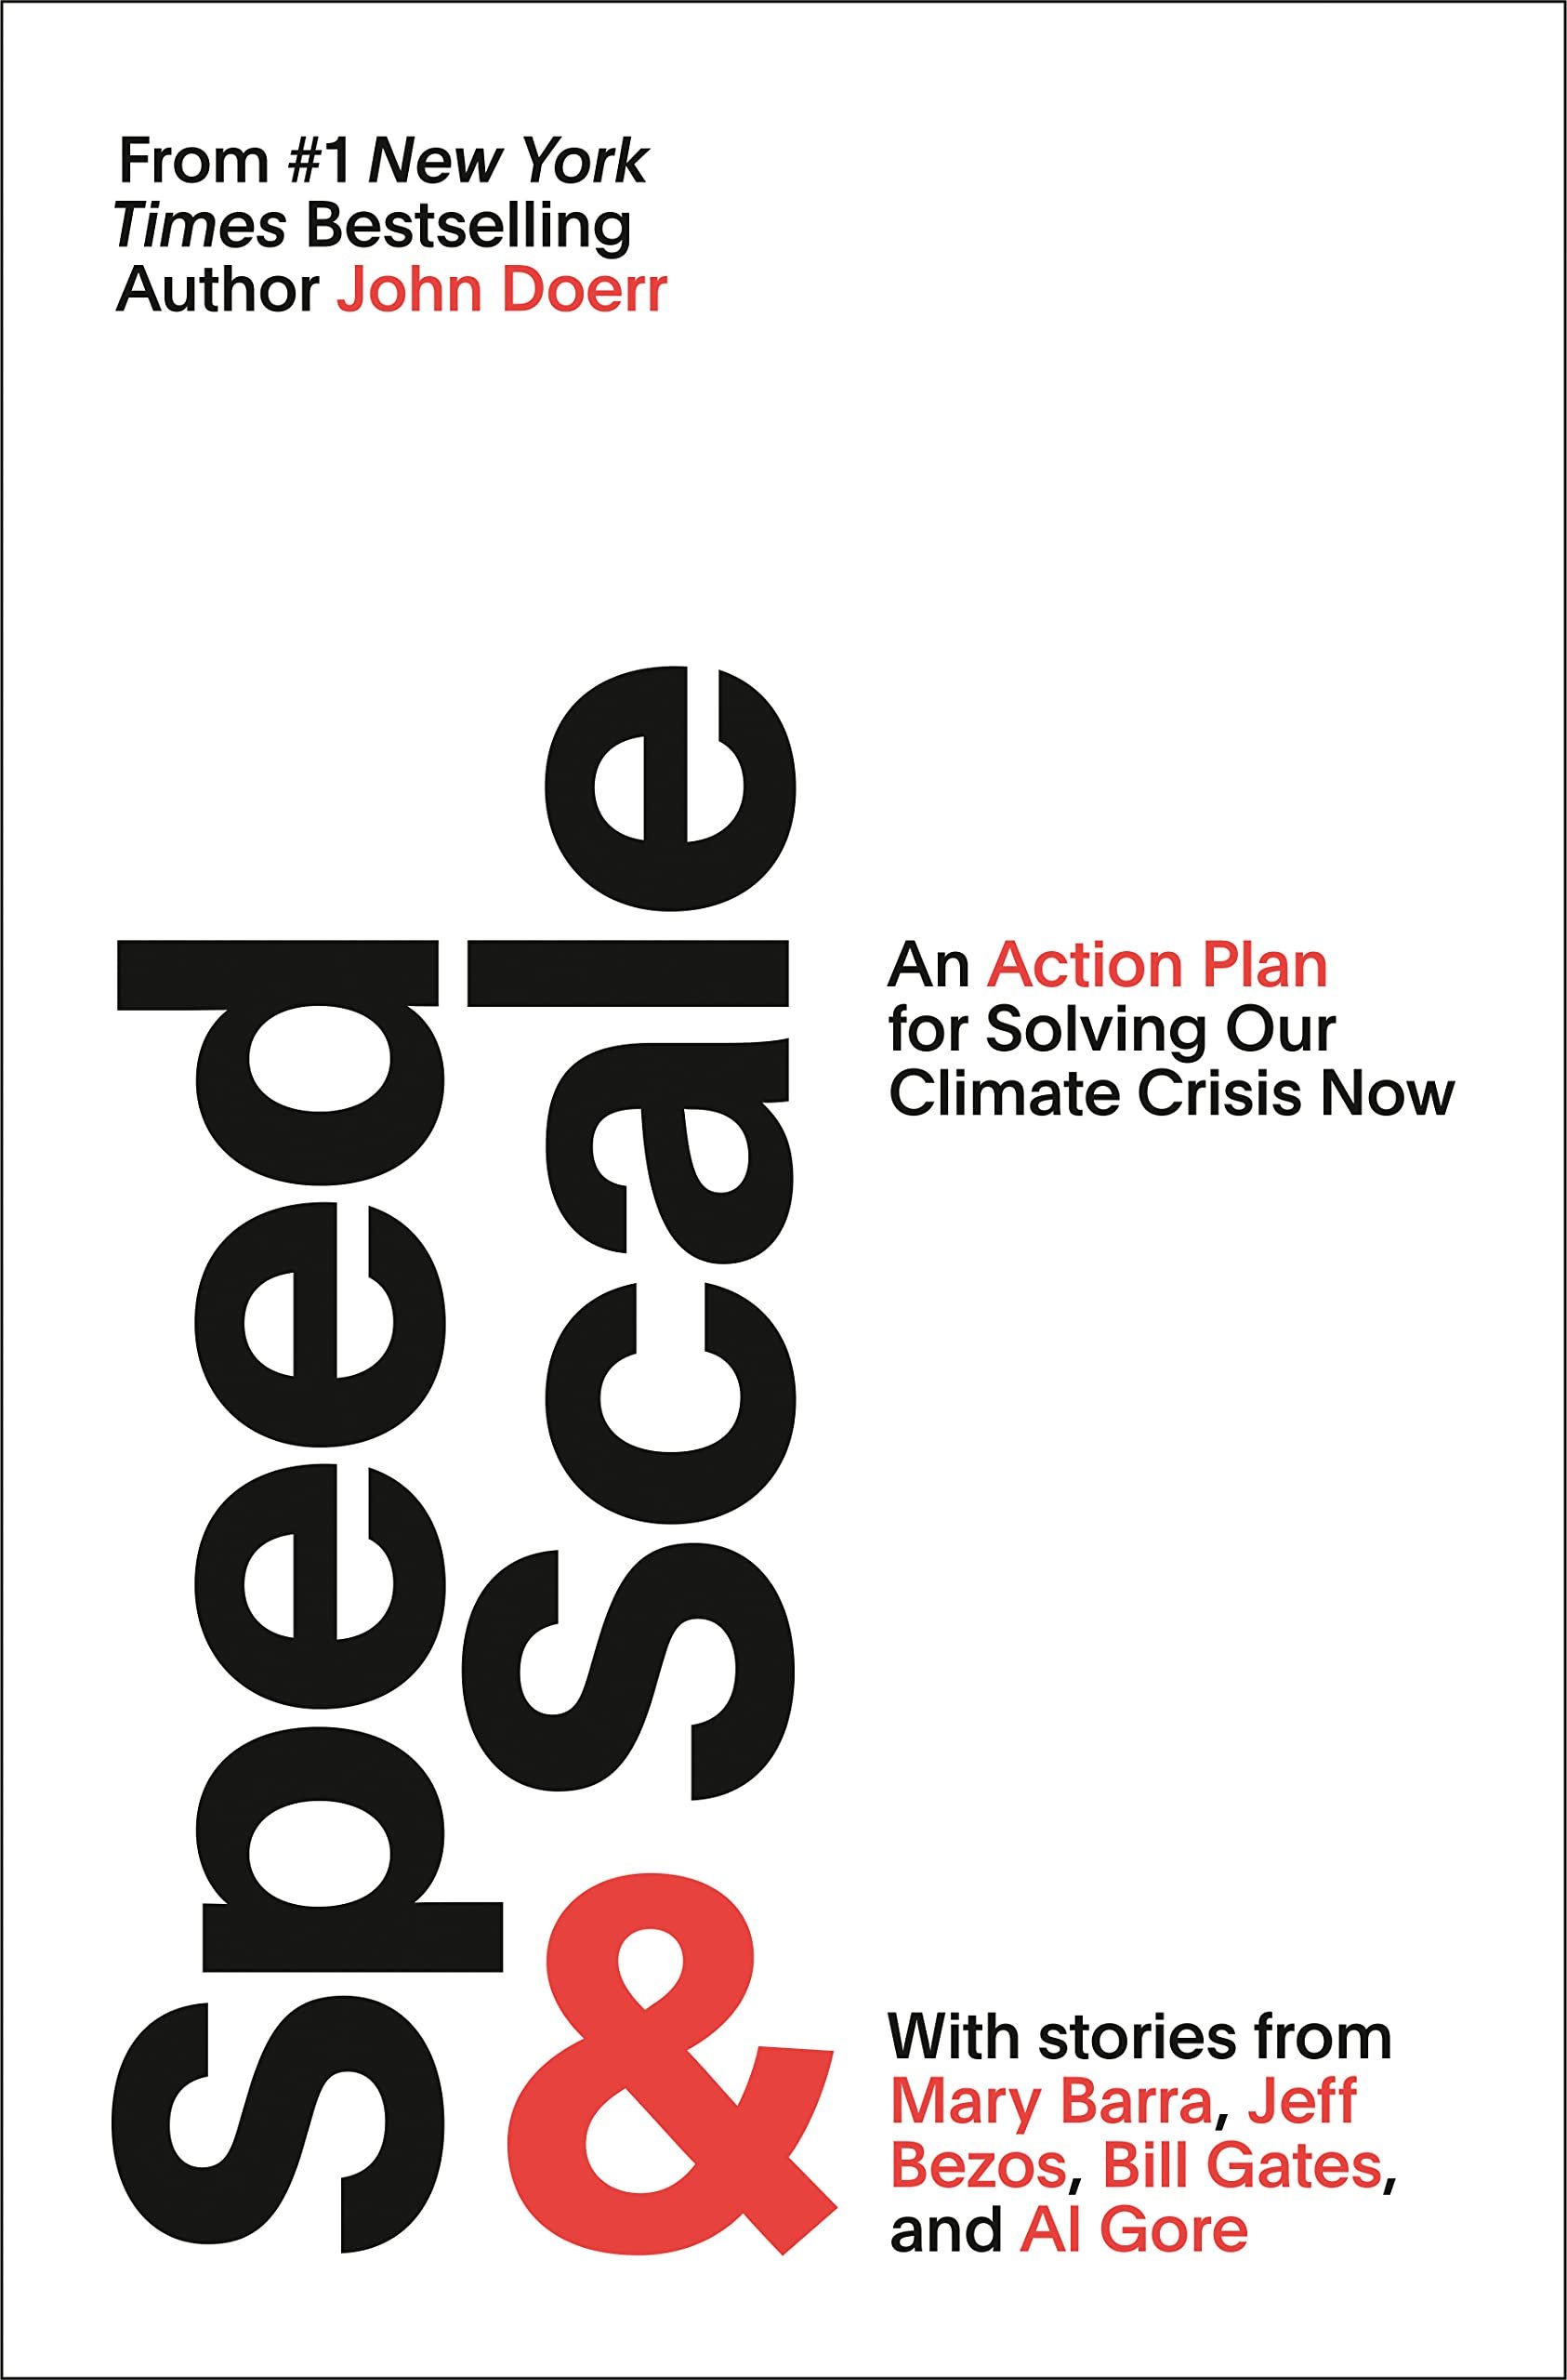 A sweeping and urgent action plan to conquer humanity's greatest challenge: climate change.